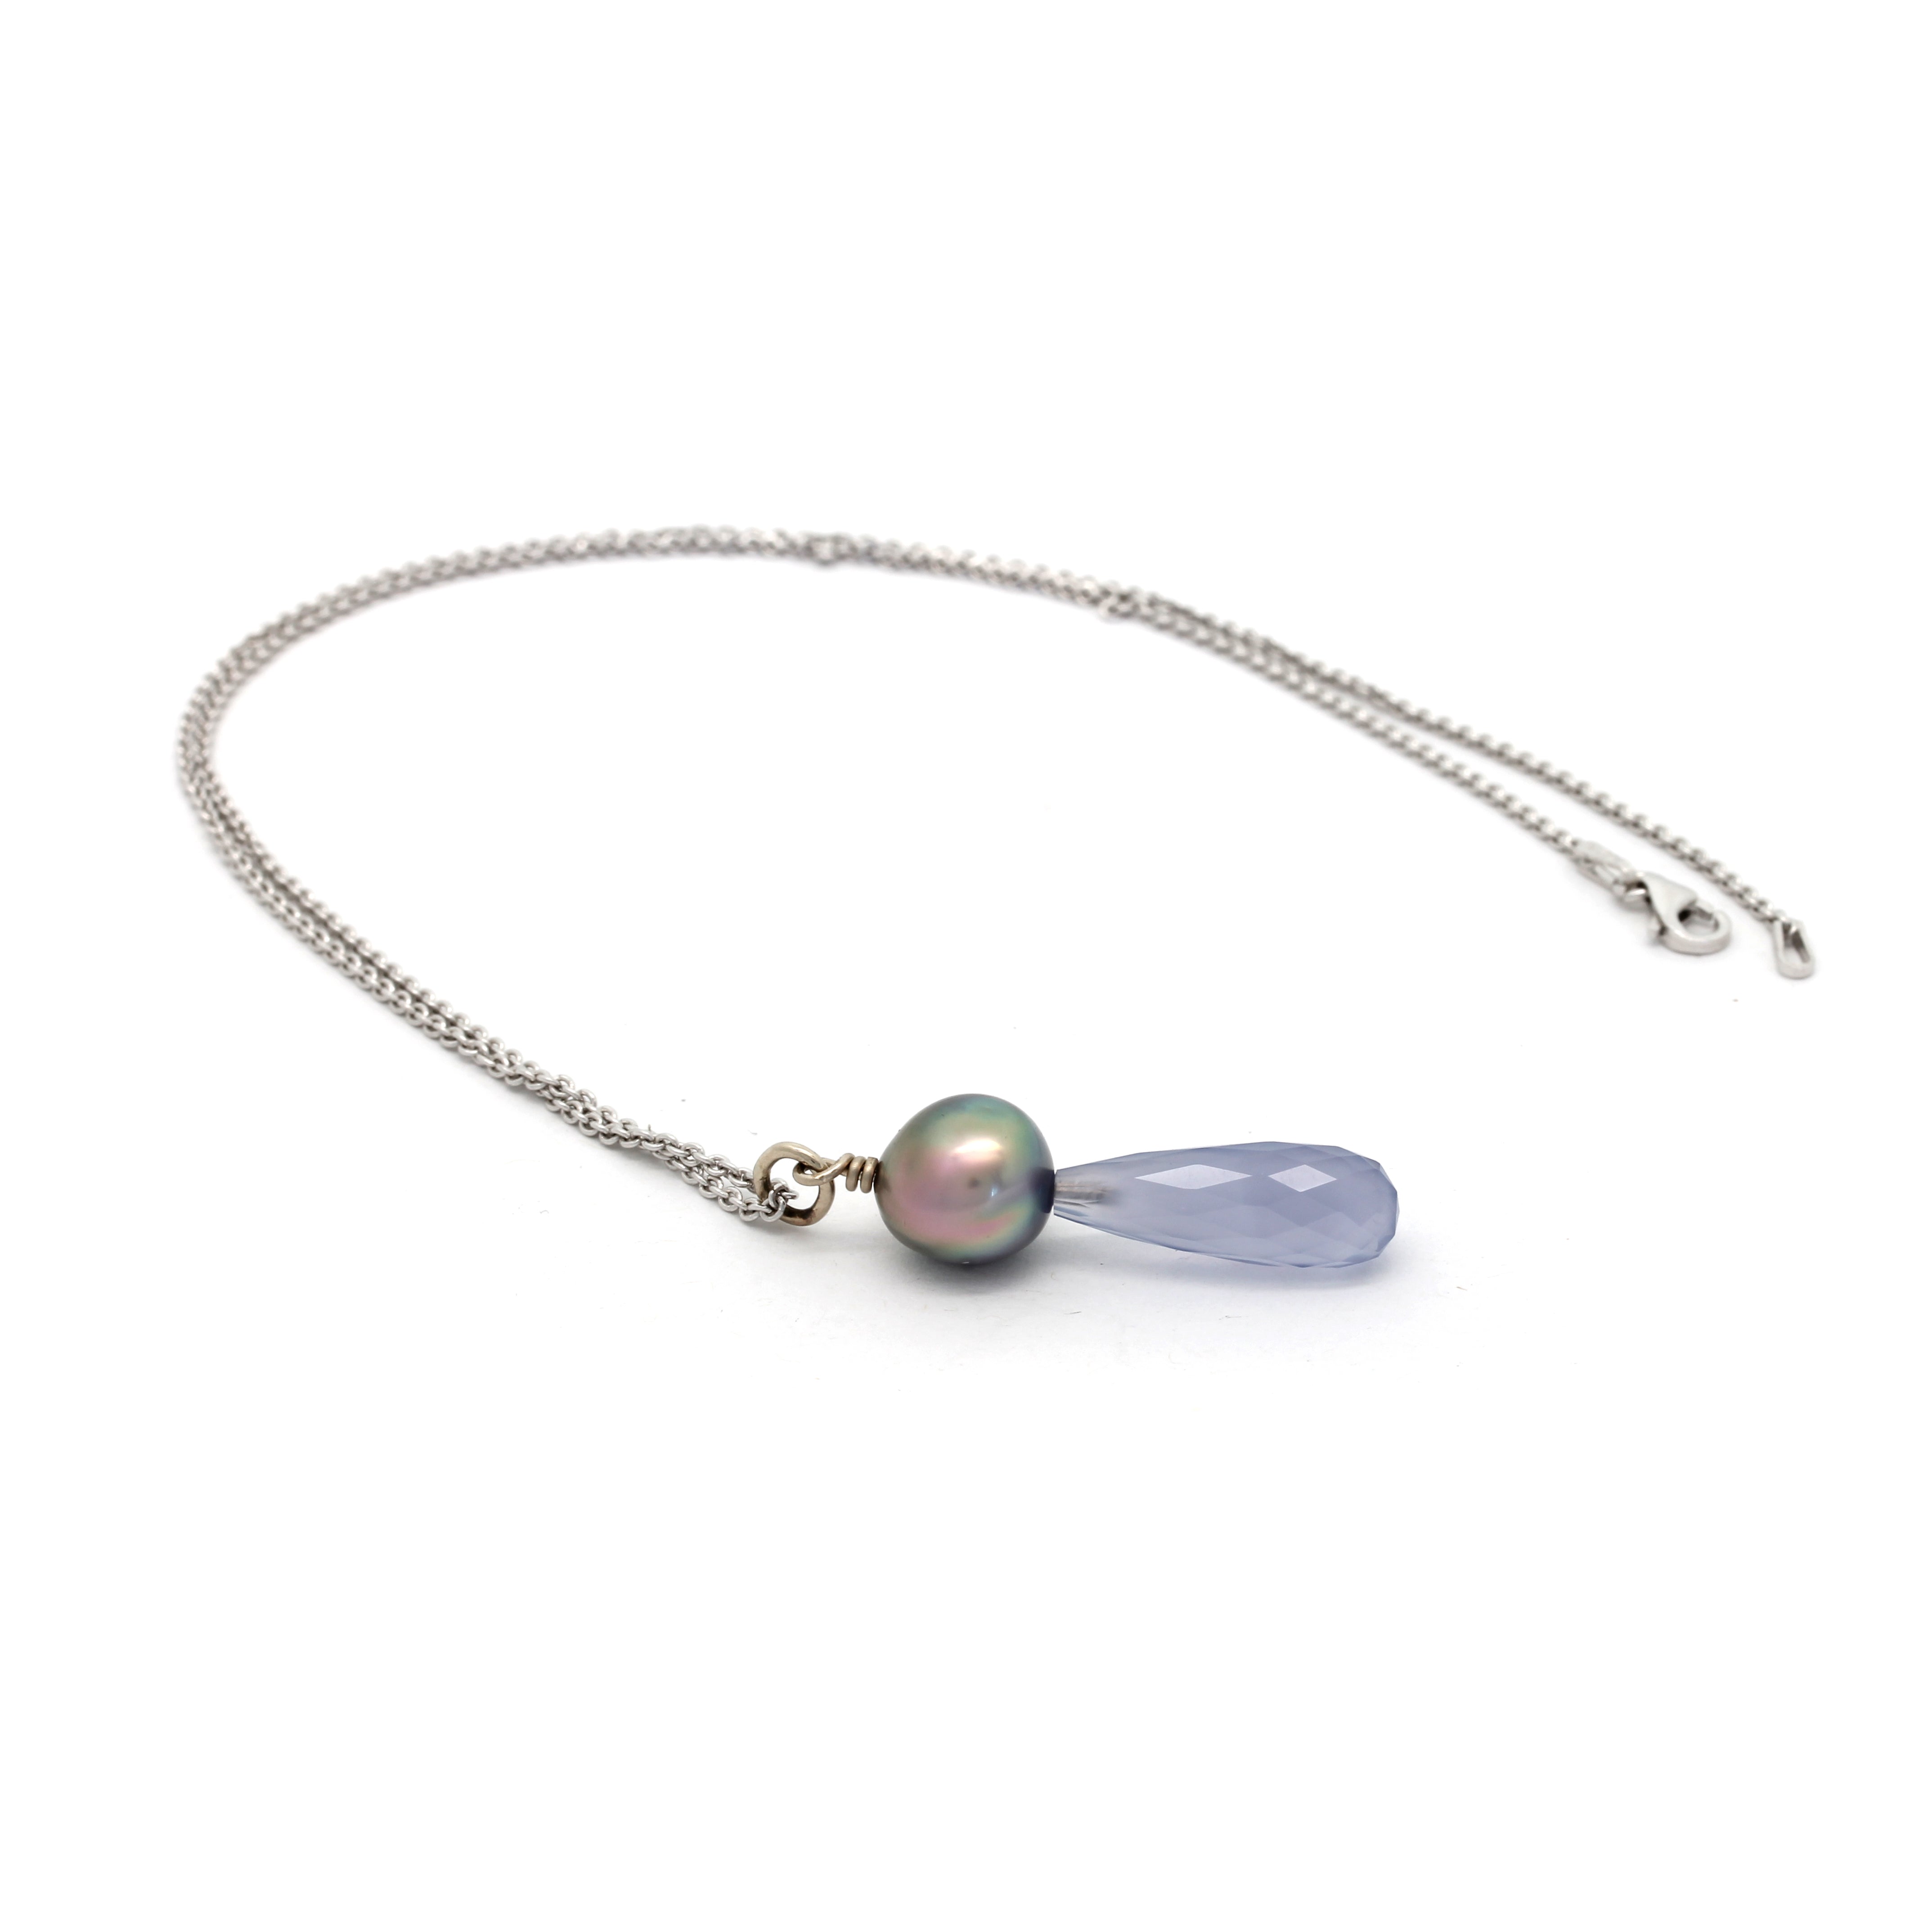 Multicolored Green/Pink Cortez Pearl on White Gold Pendant with a Heavenly-Blue Chalcedony